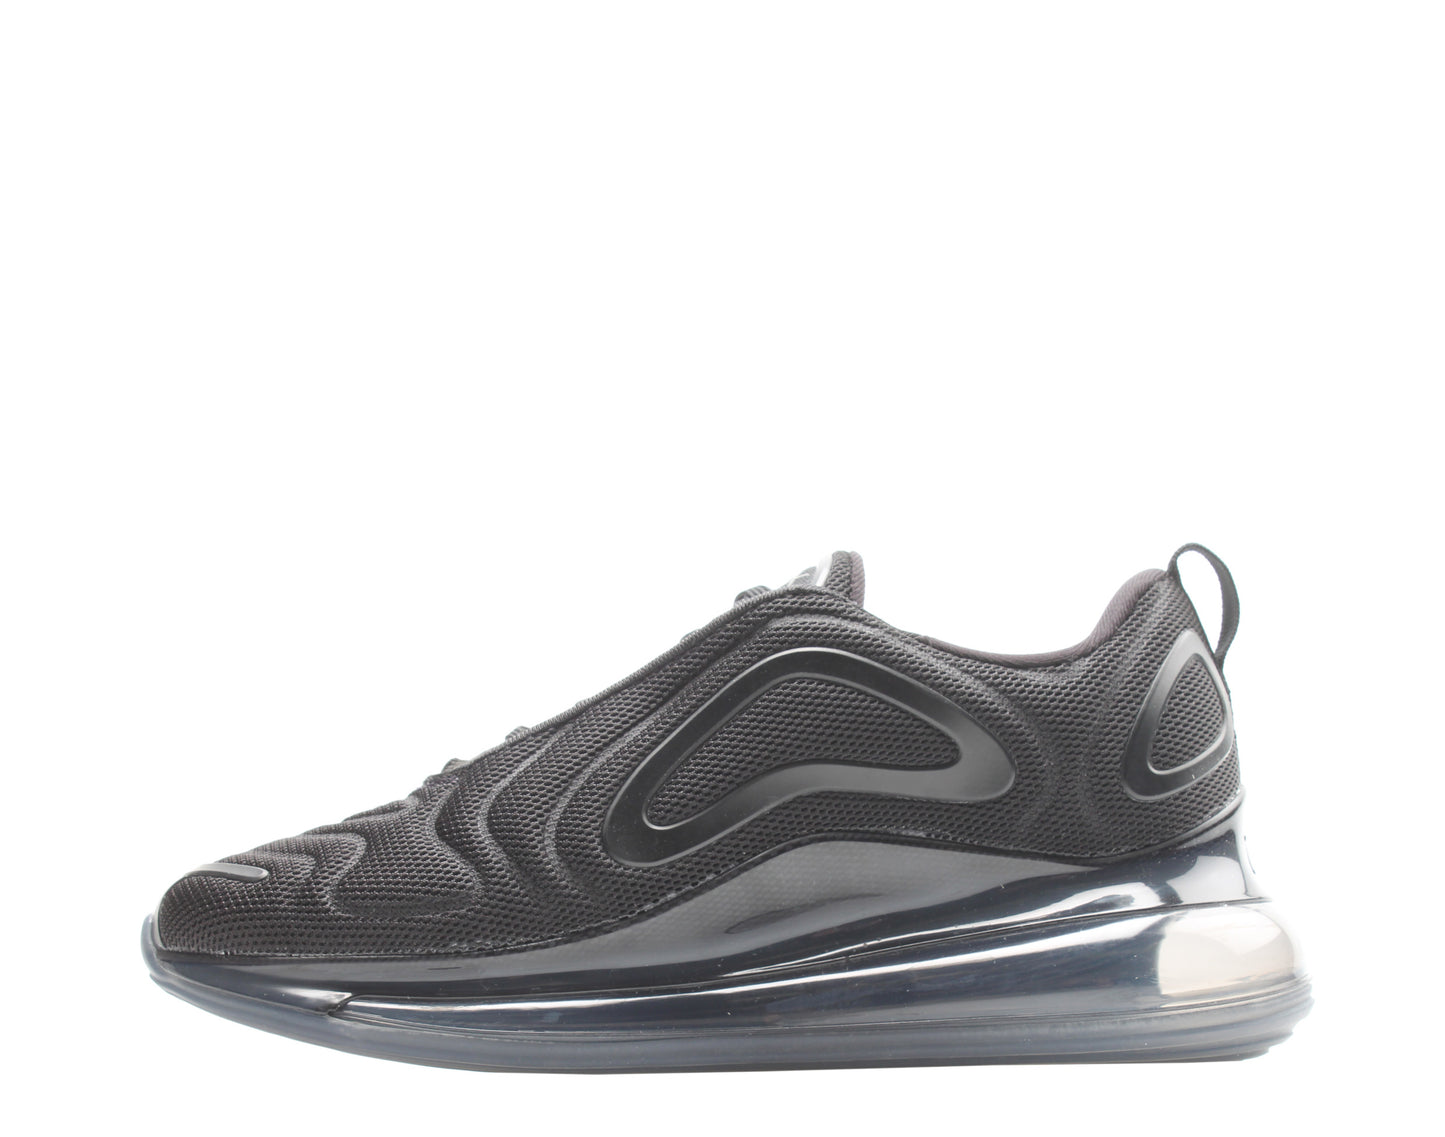 Nike Air Max 720 Triple Black/Anthracite Men's Running Shoes AO2924-007